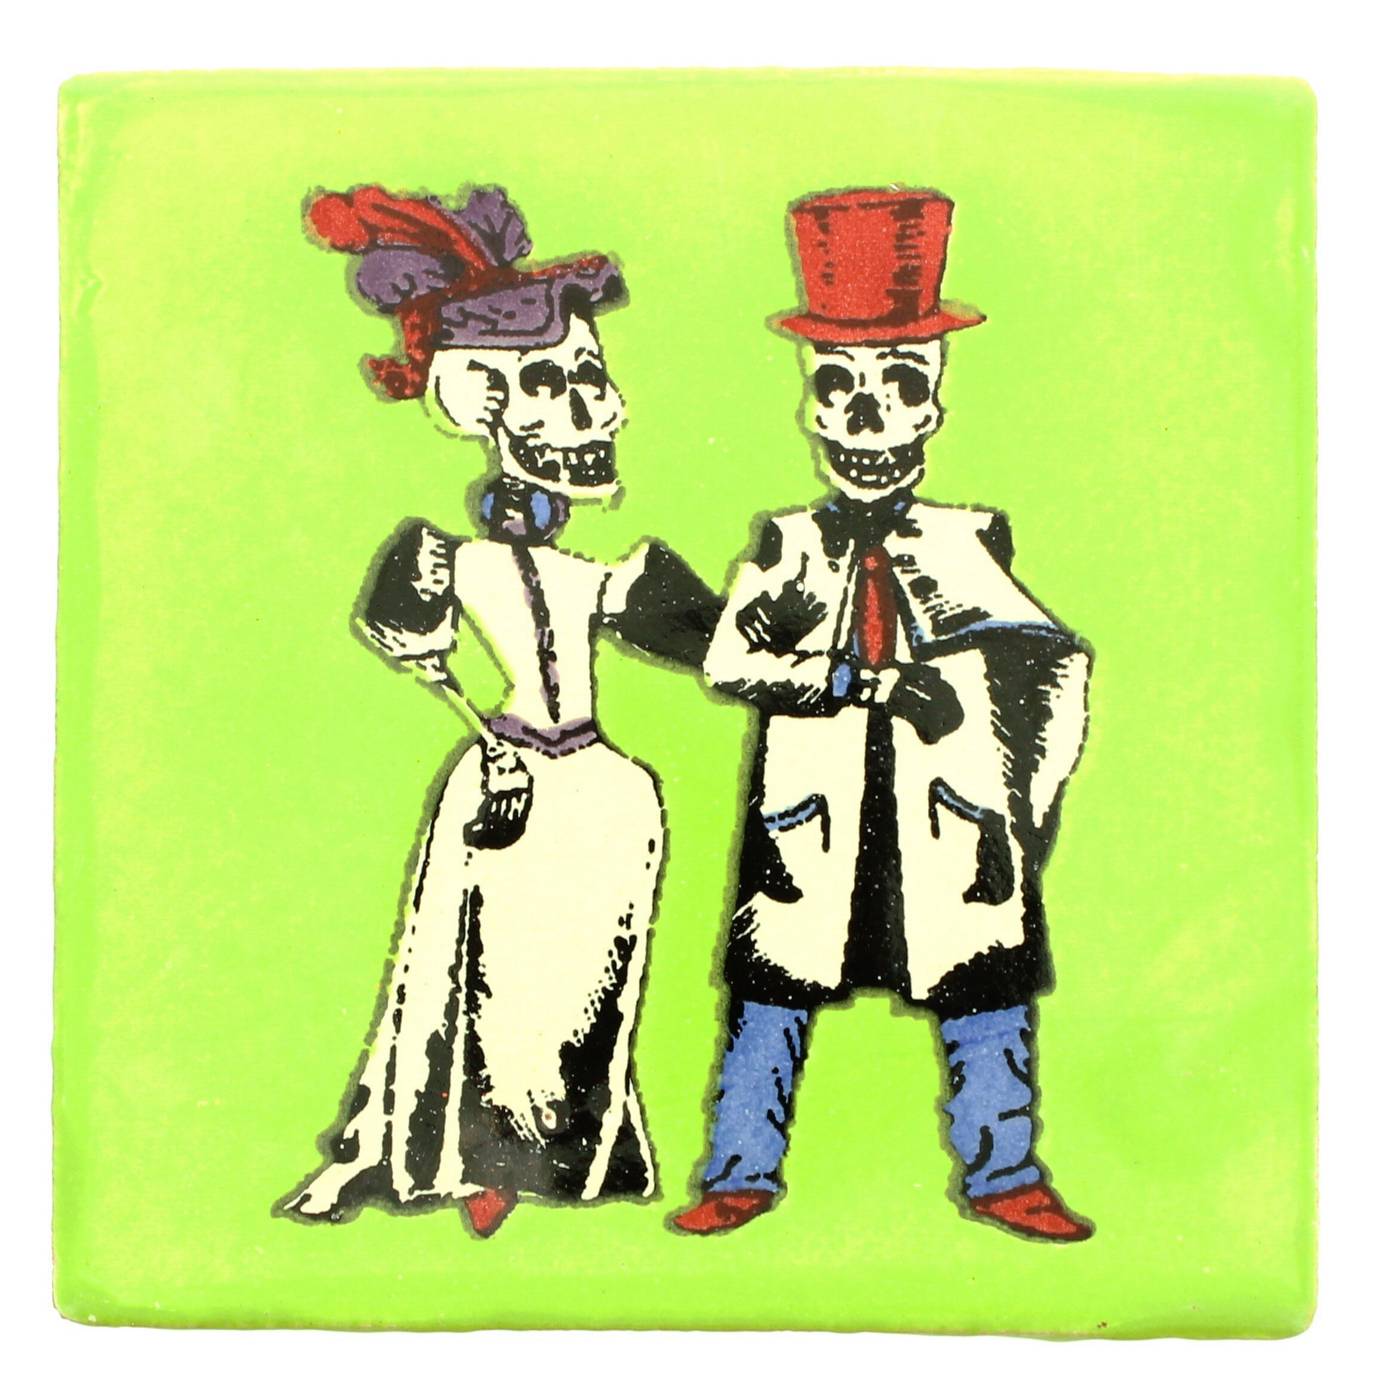 Blue Orange Pottery Day of the Dead 4" x 4" Decorative Tiles, Assorted Colors & Designs; image 5 of 5